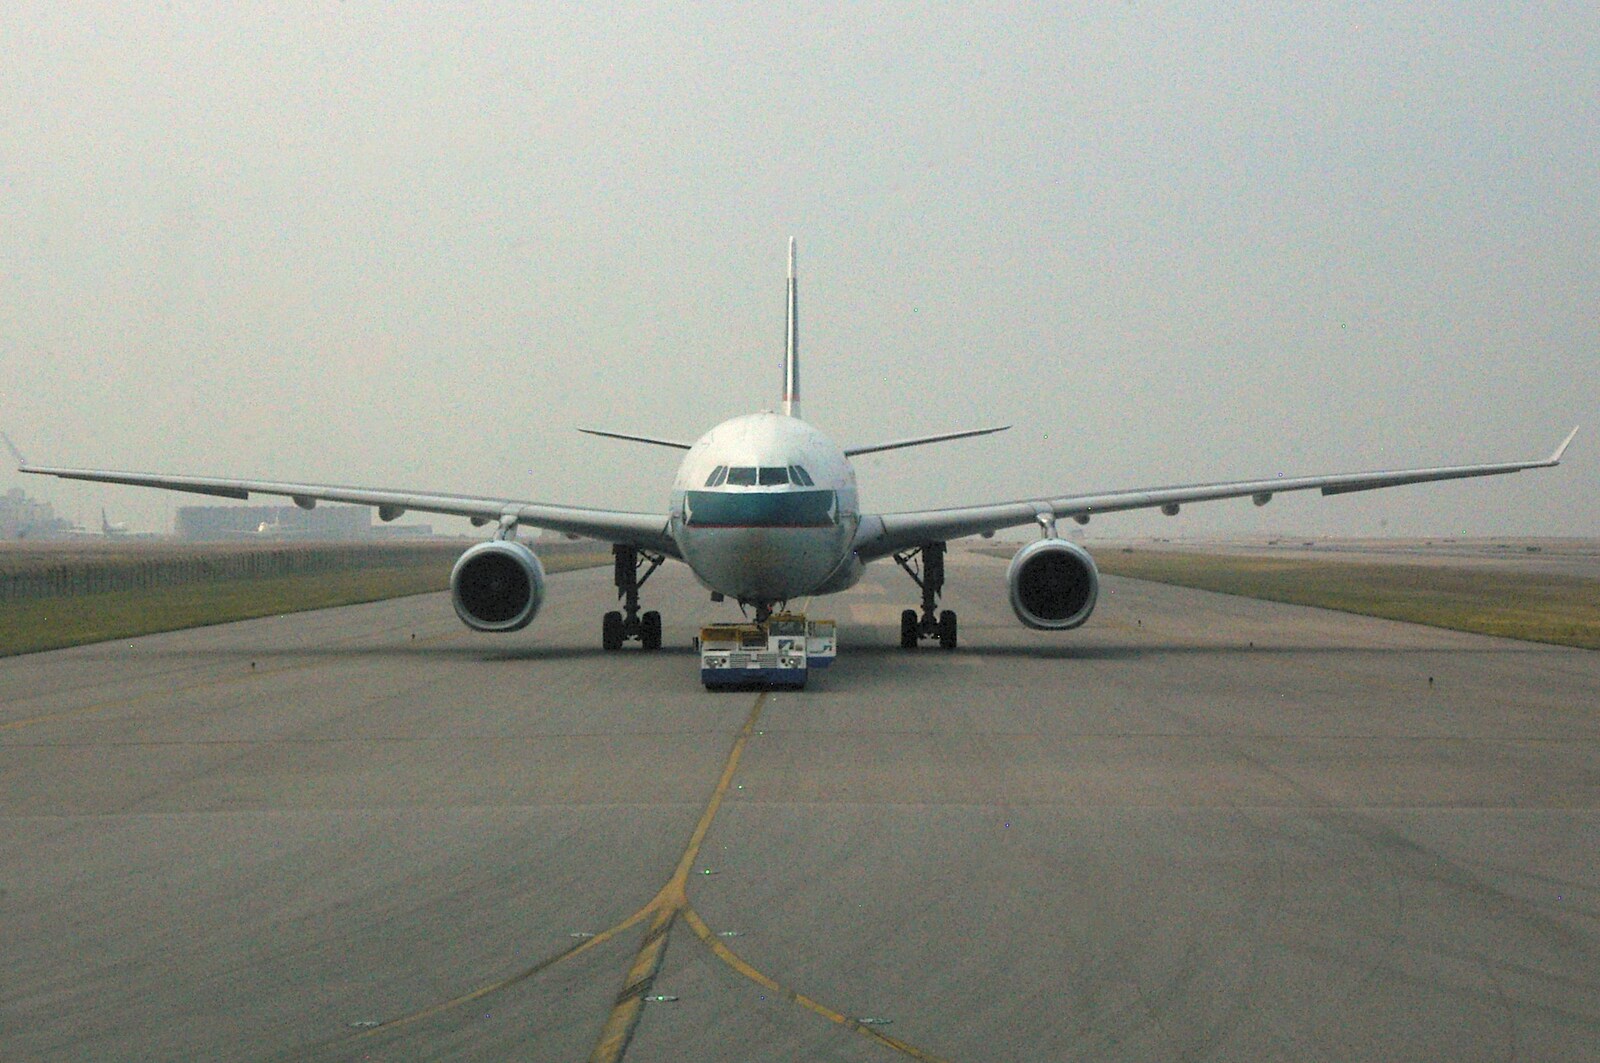 A plane taxis at Chep Lap Kok from A Few Days in Nanjing, Jiangsu Province, China - 7th October 2006